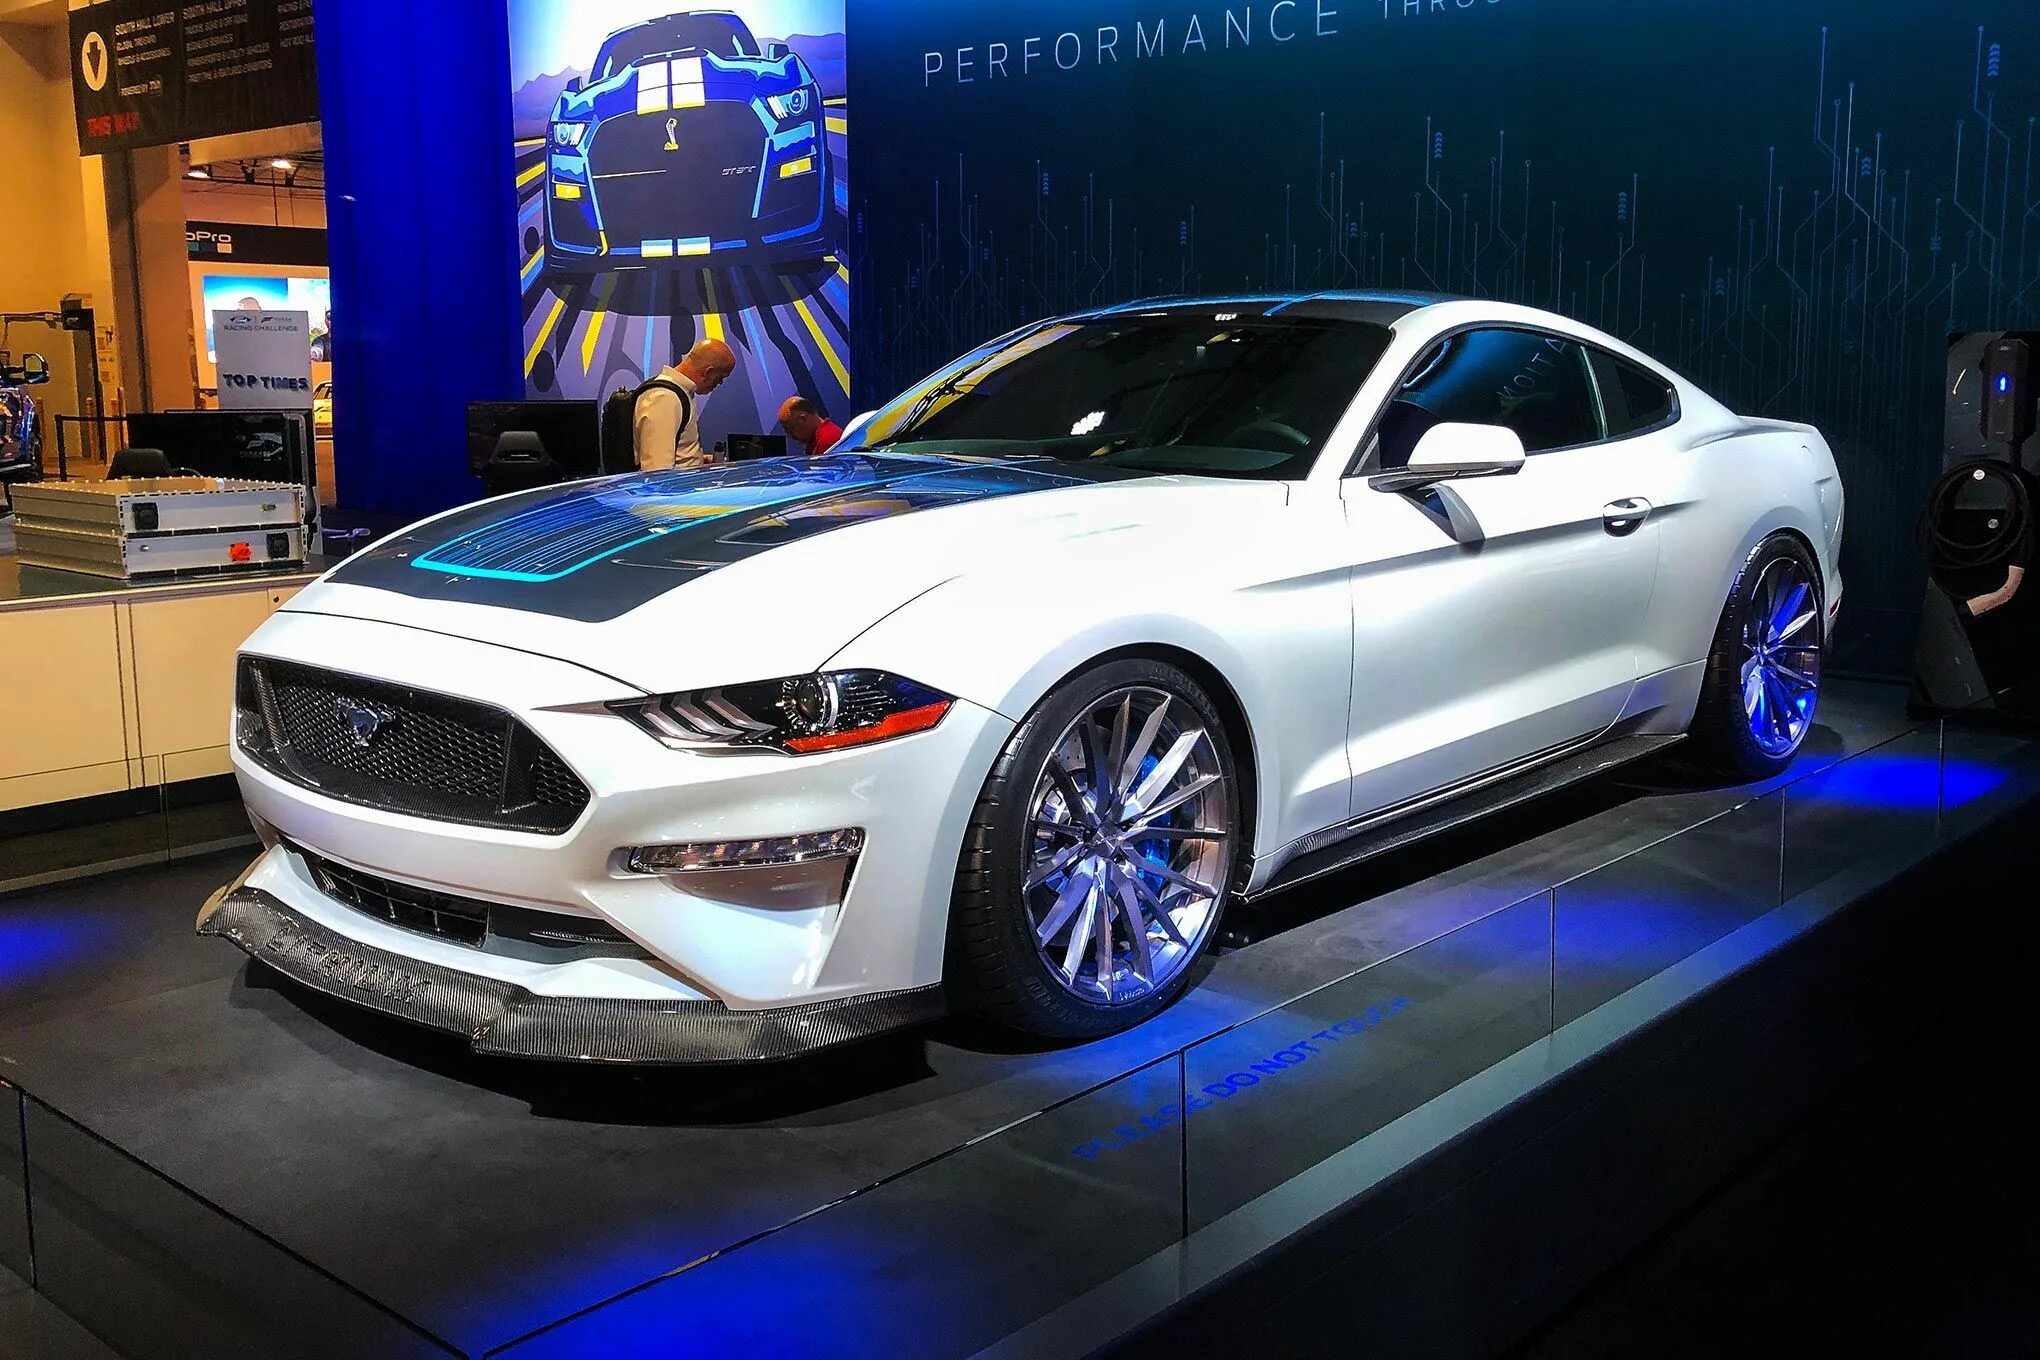 Ford Mustang Electric. Форд Мустанг 2022 Electric. Мустанг электромобиль 2022. Форд Мустанг 2021. Машины 2026